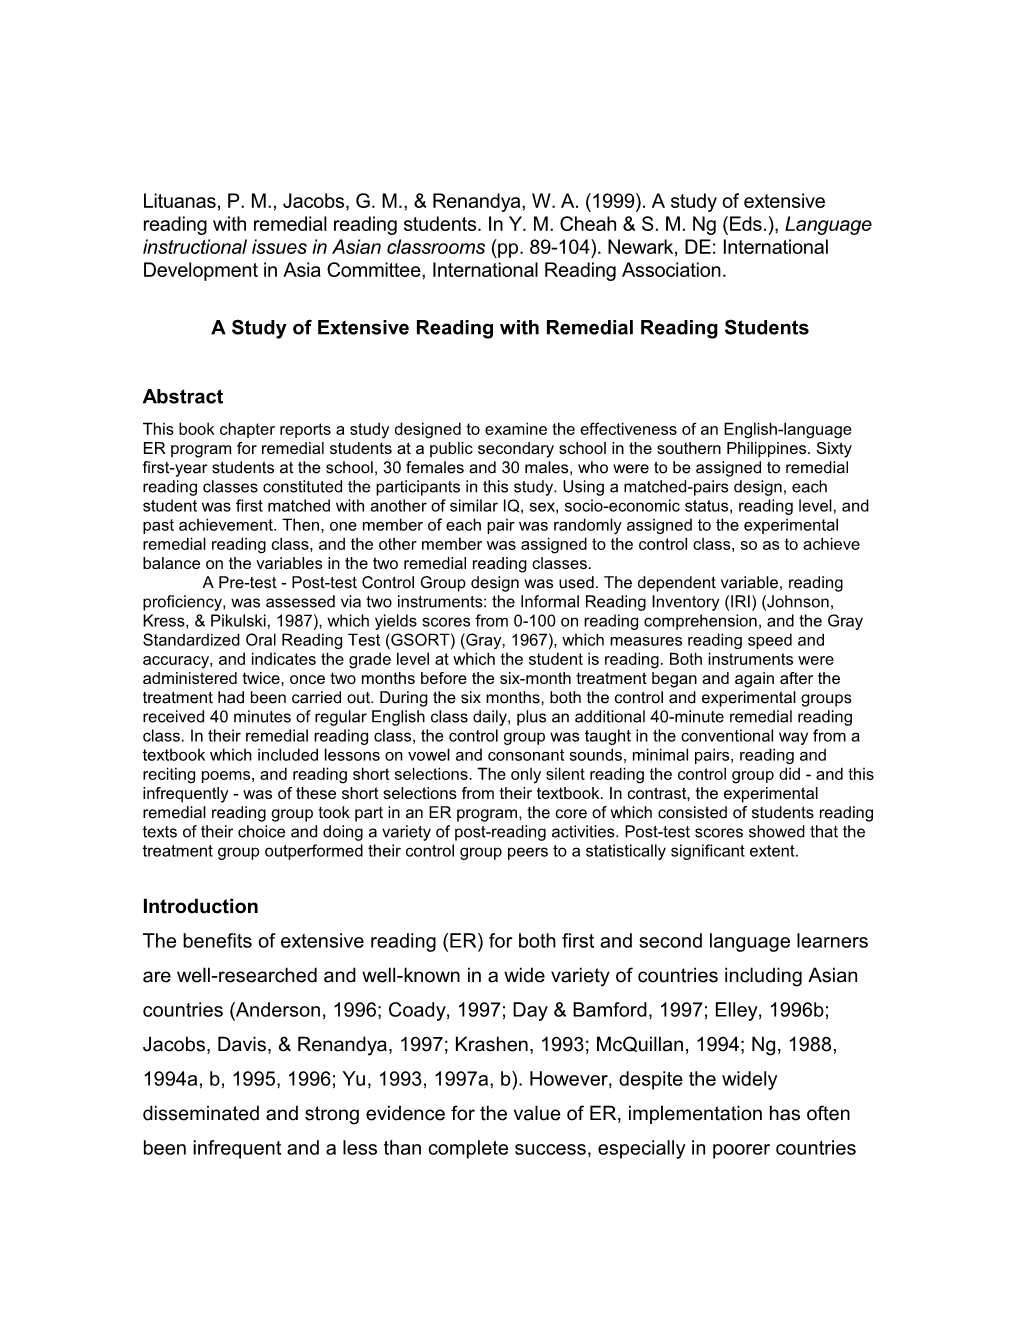 A Study of Extensive Reading with Remedial Reading Students